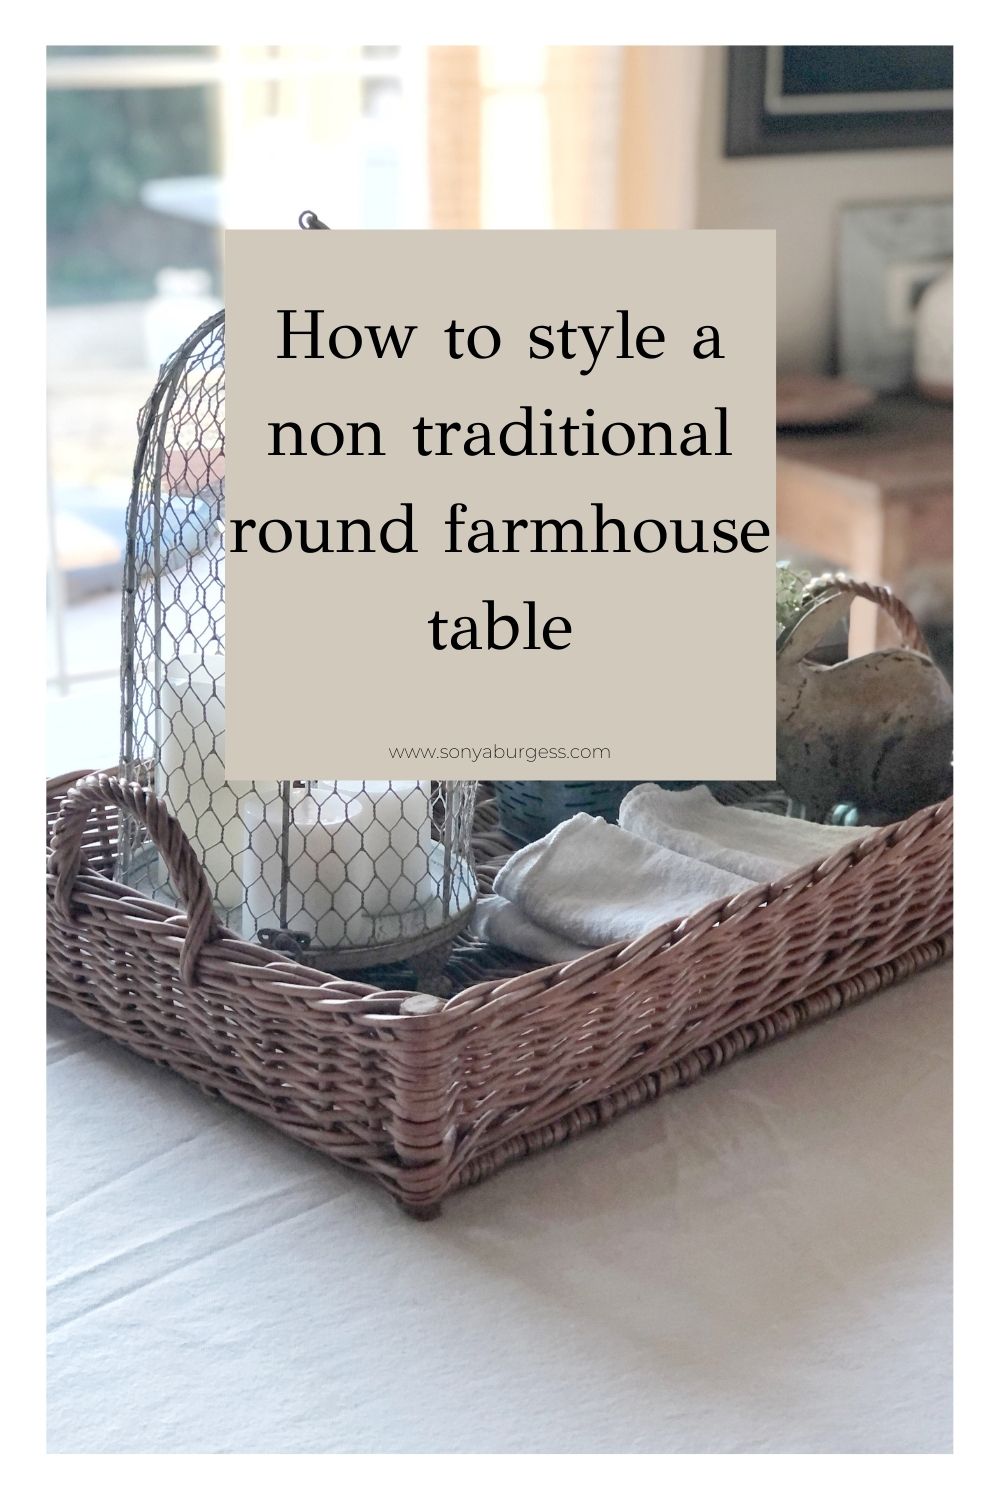 How to style a non traditional round farmhouse table